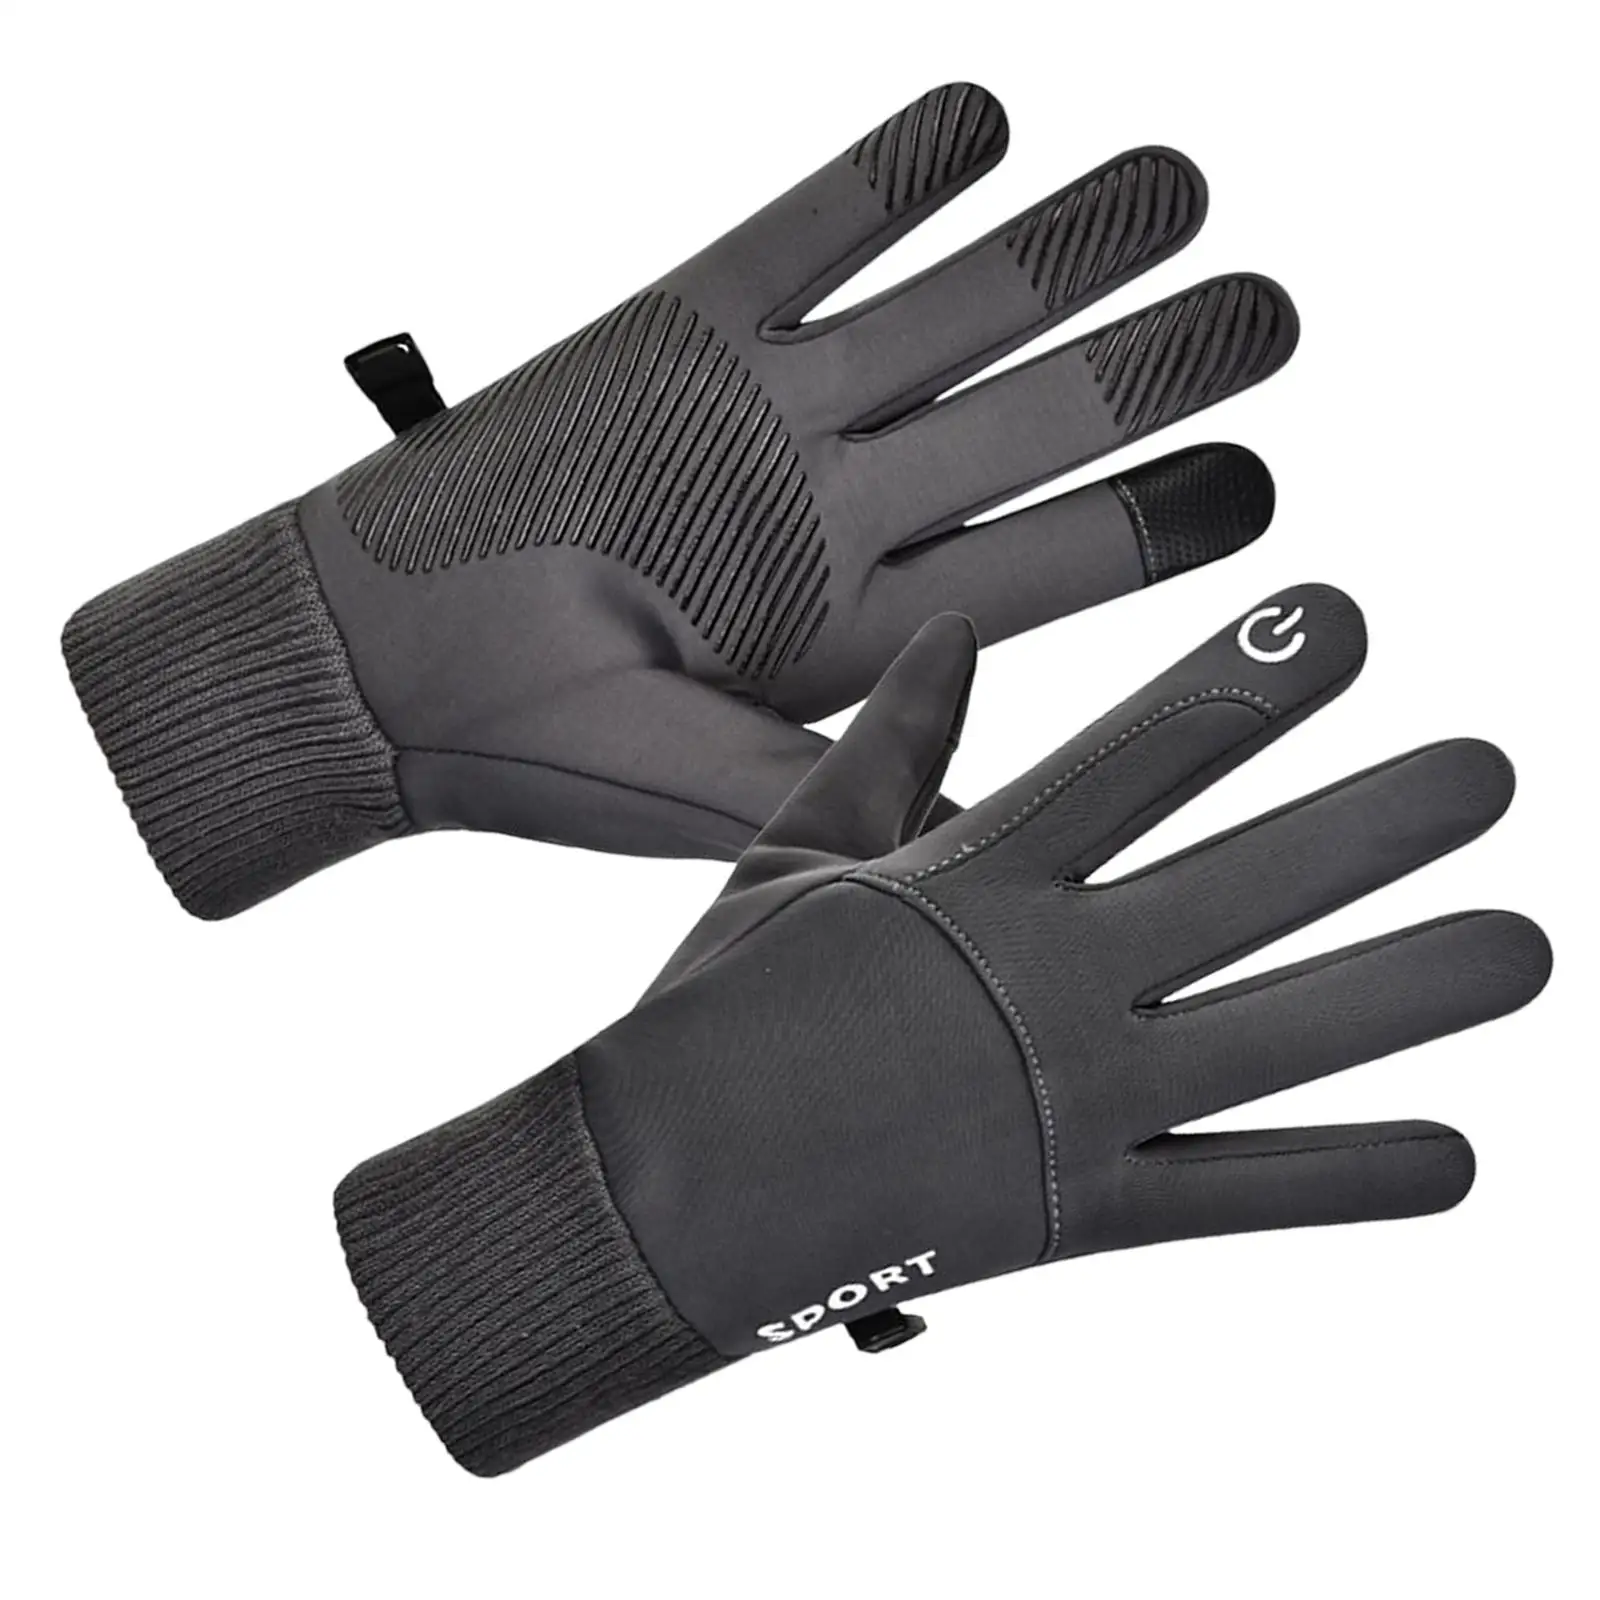 Gloves, Waterproof, Durable, Non-slip, Touch Screen, Soft, Fashionable,